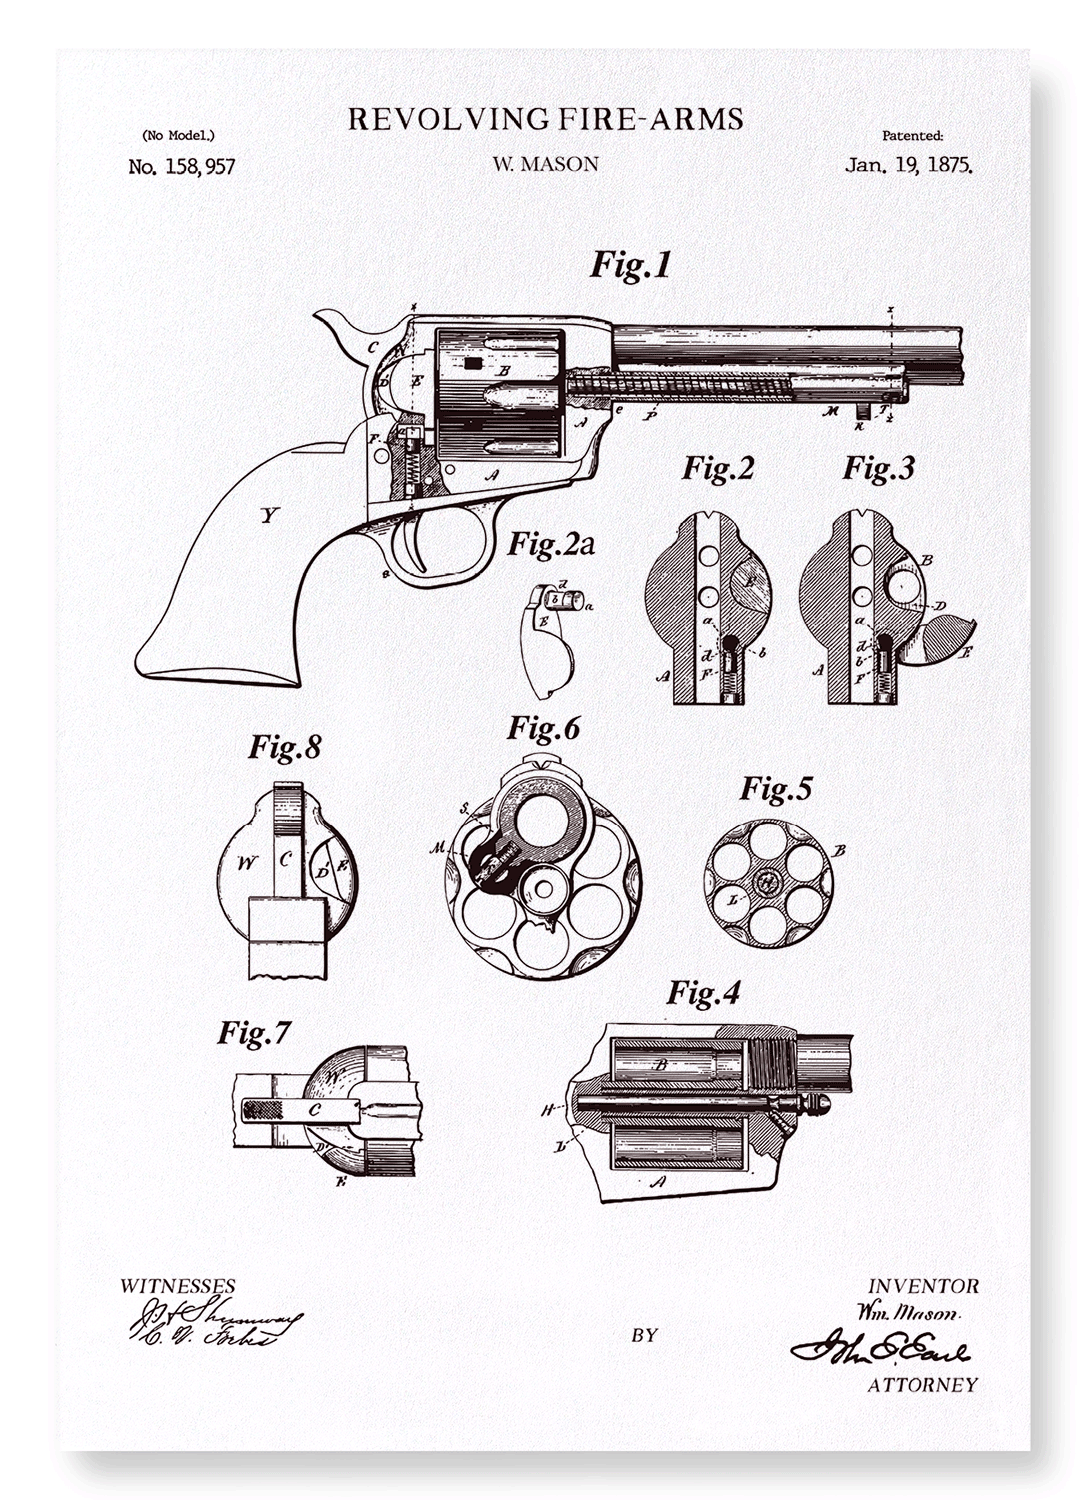 PATENT OF REVOLVING FIRE-ARMS (1875): Patent Art Print